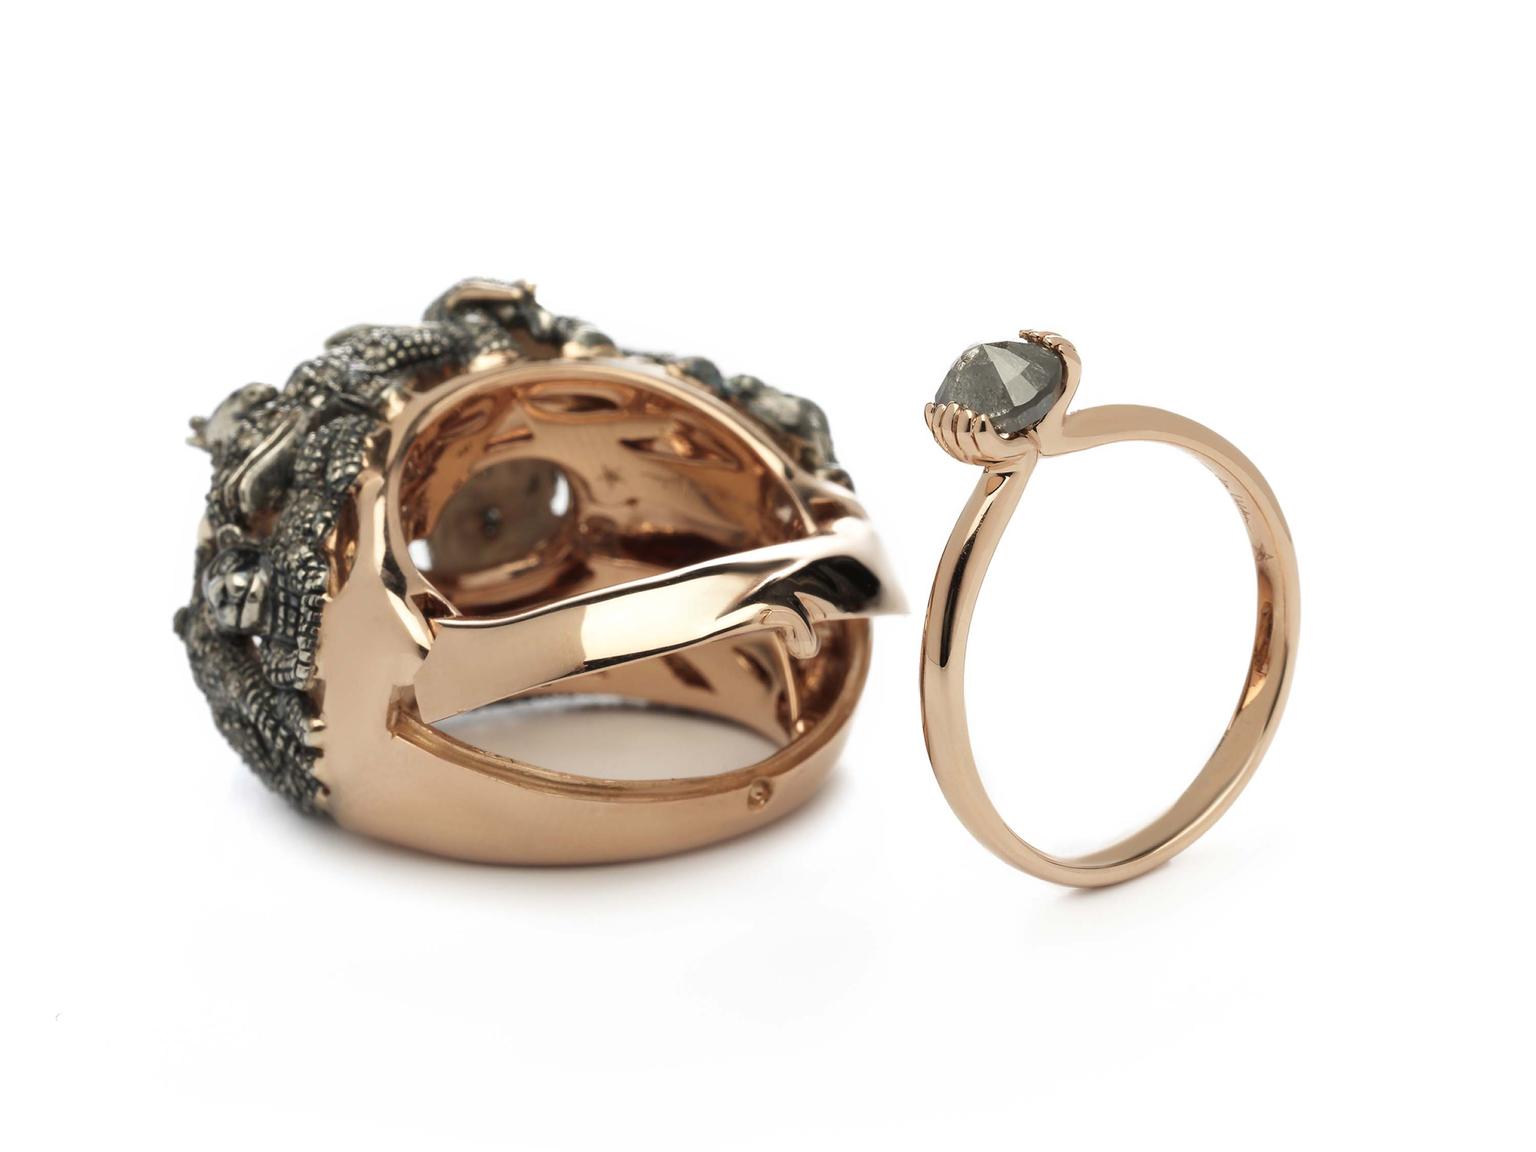 Bibi van der Velden's "ring within a ring", which will be shown for the first time at The Couture Show 2014. The main ring is decorated with miniature elephants, giraffes, lions and rhinos, while the hidden ring depicts hands clasping a brown diamond